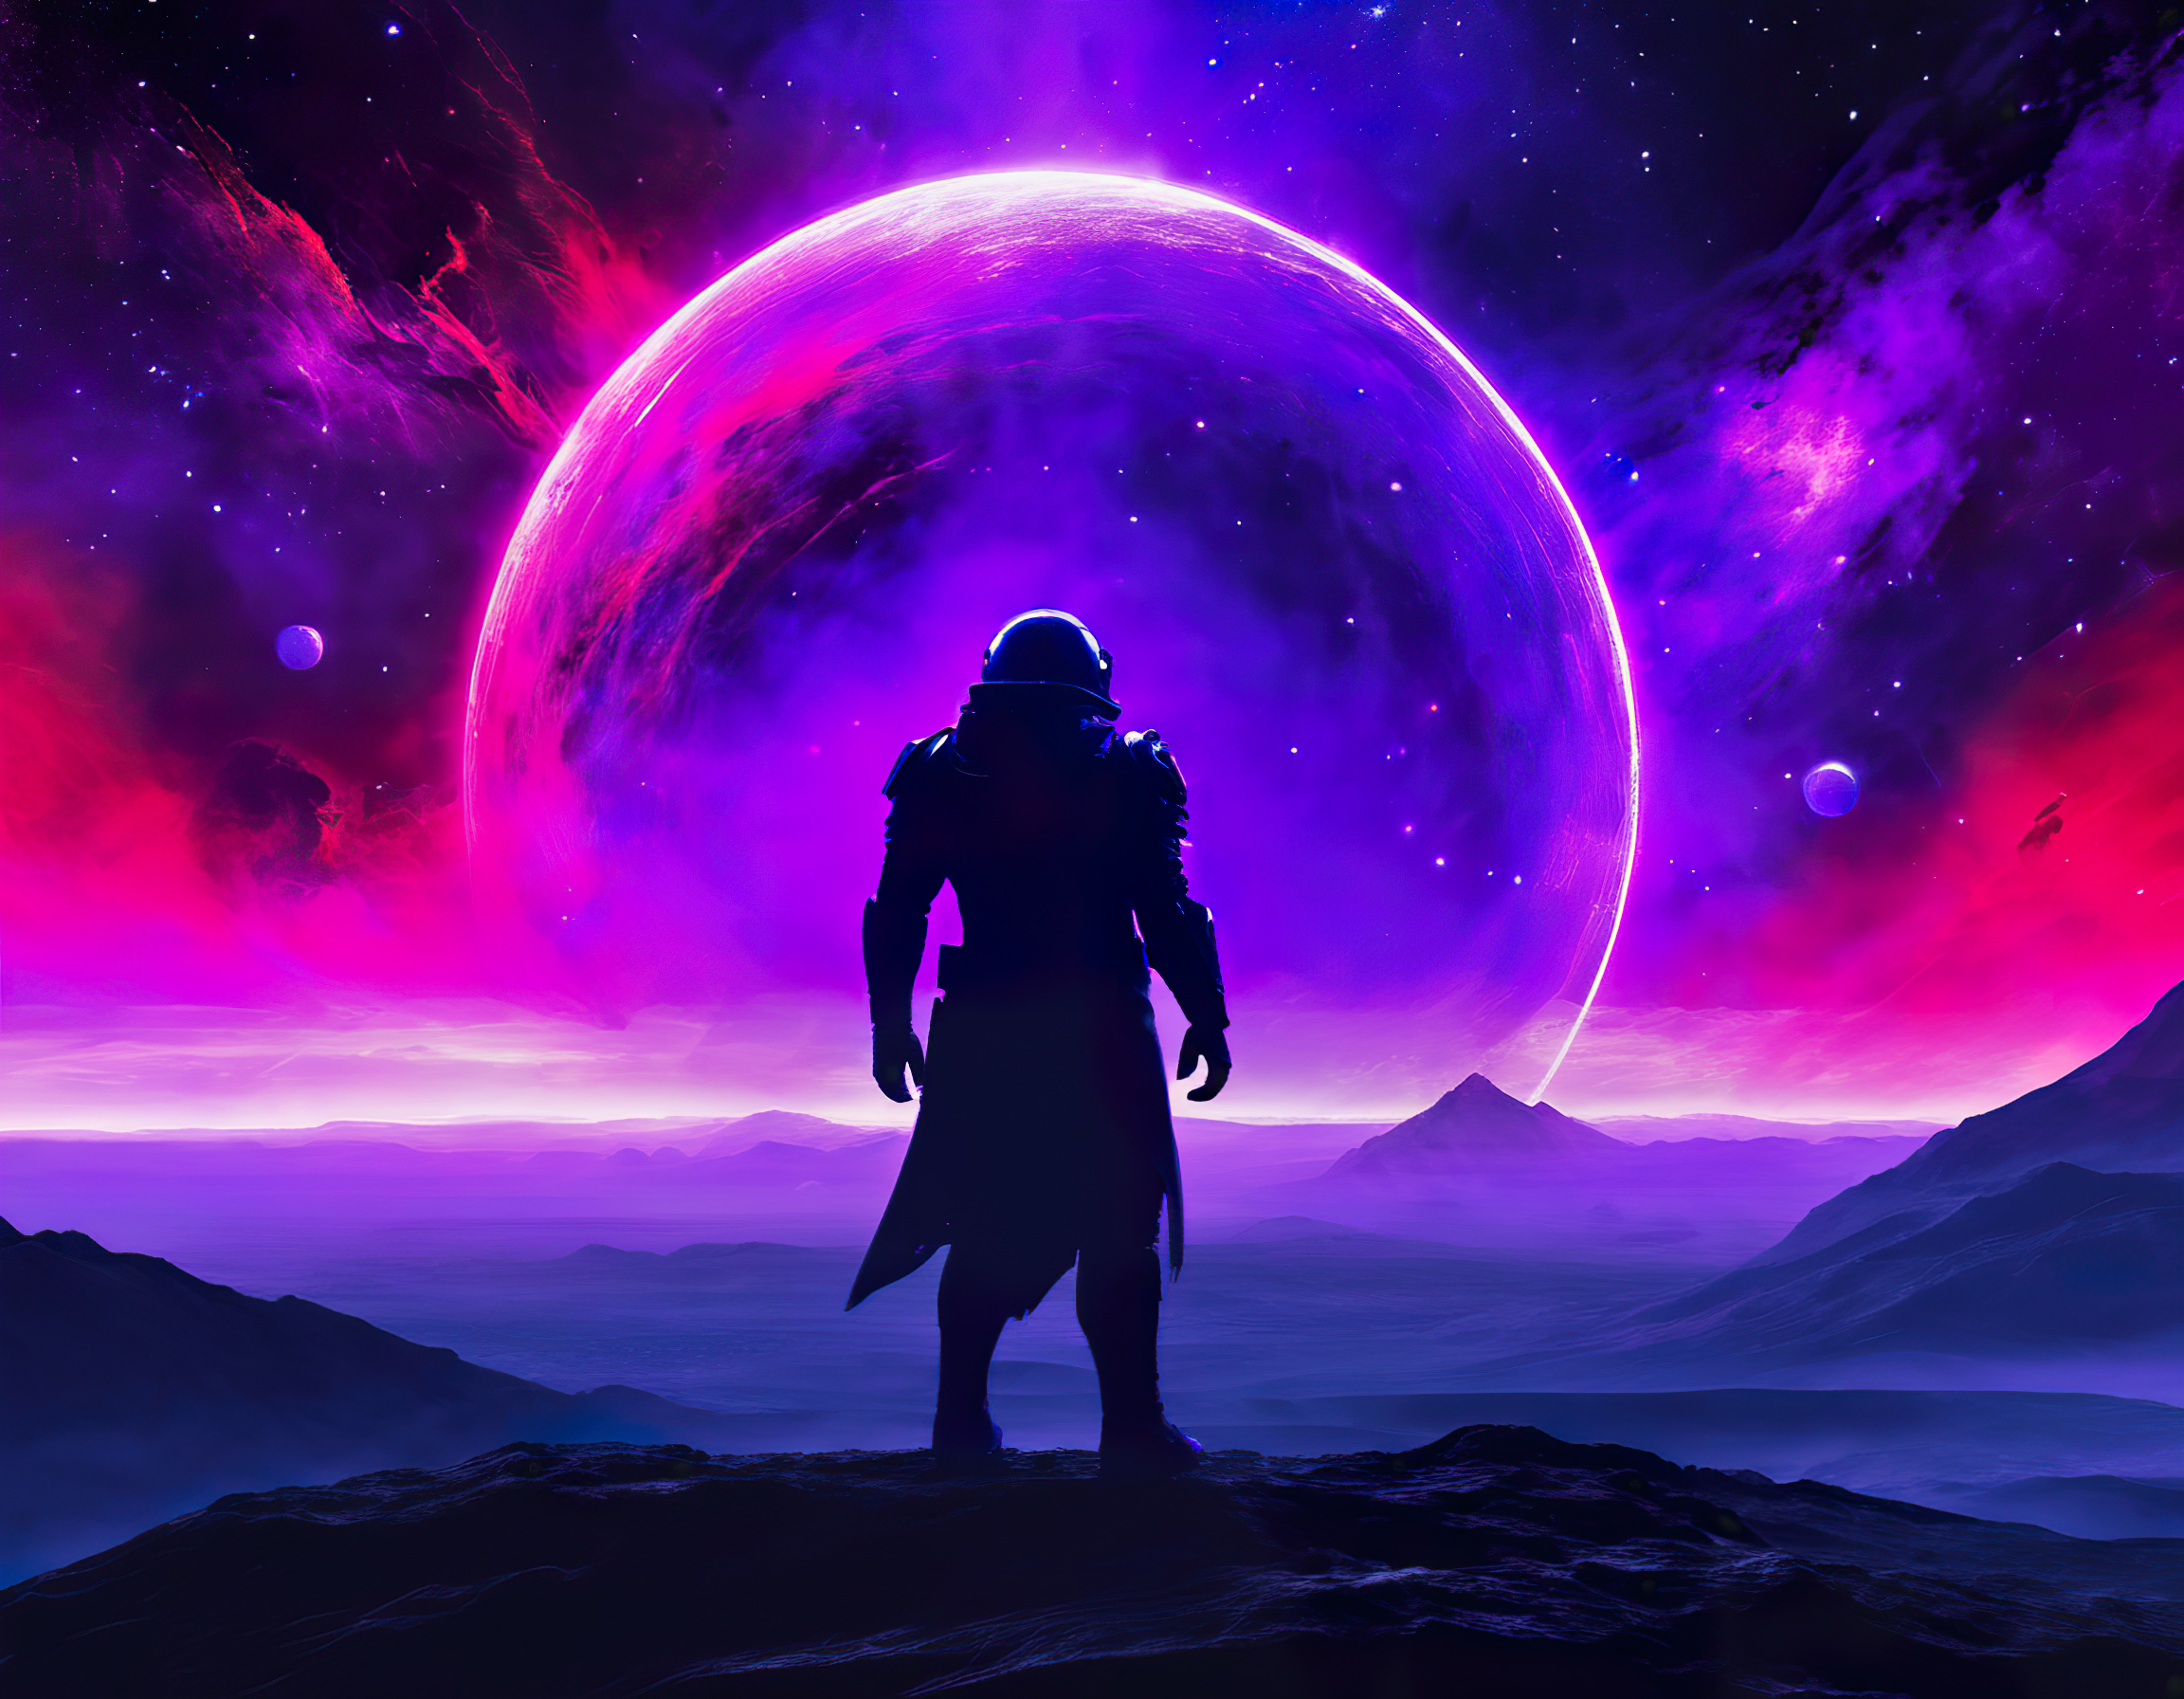 A Dark Figure Stands Against a Purple-Pink Backdrop with a Moon in the Sky